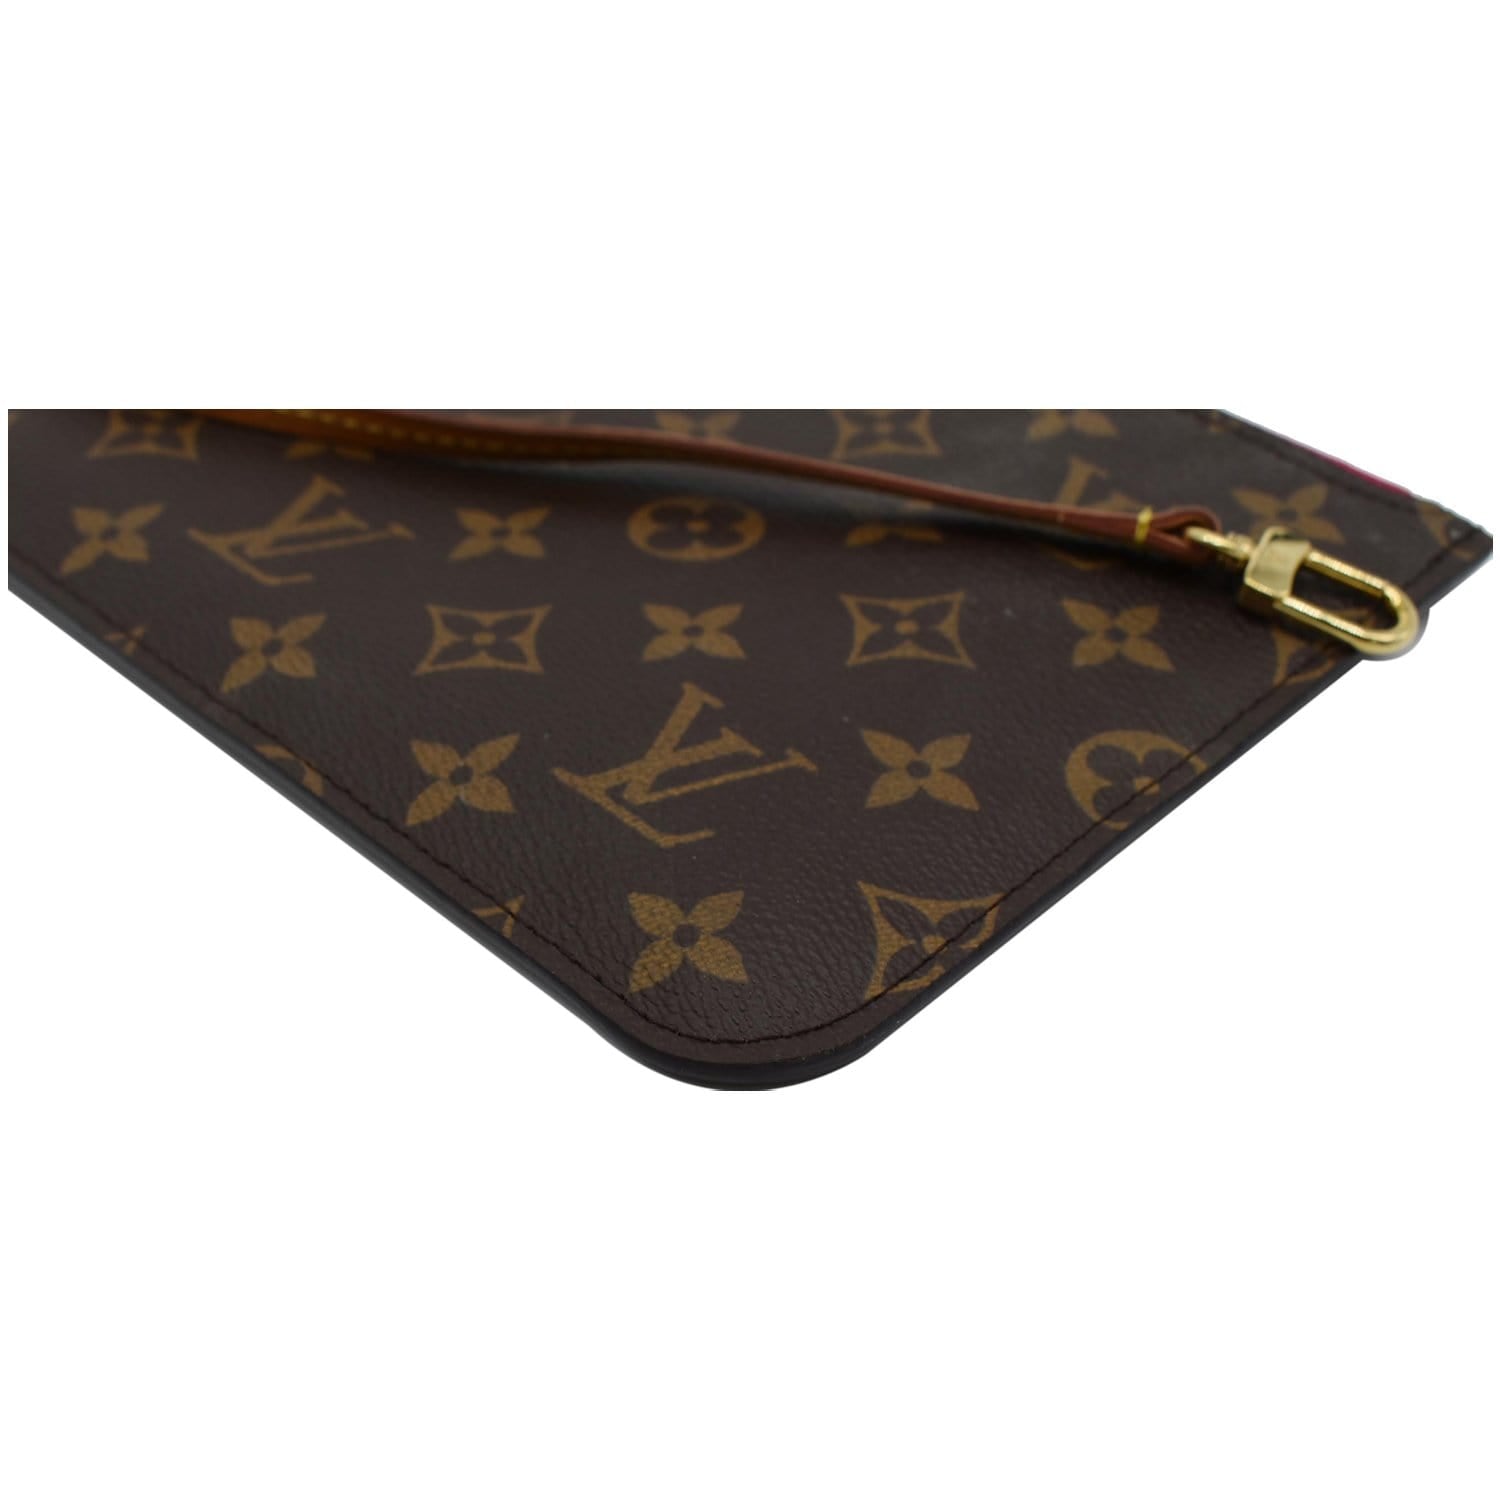 Neverfull Pouch Canvas Wristlet – Vegaluxuries